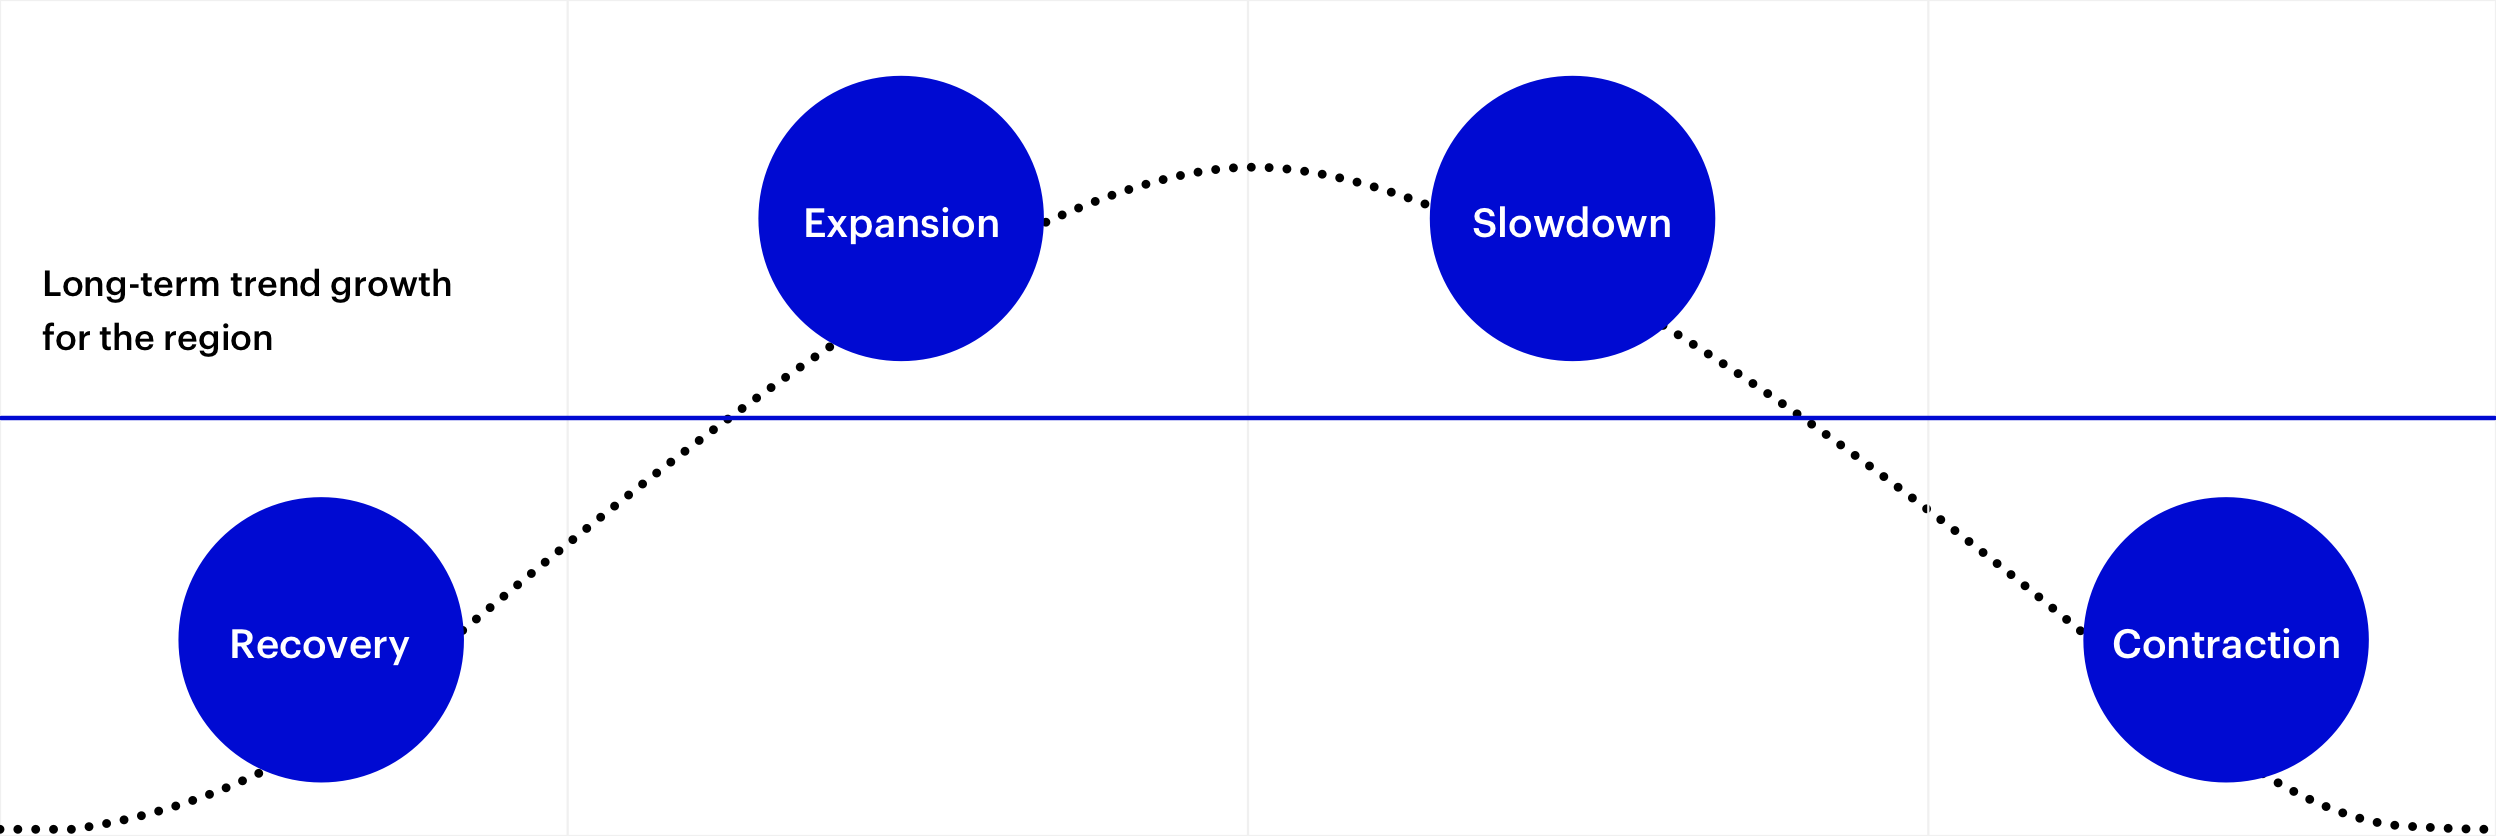 This diagram shows the four distinct regime periods of recovery, expansion, slowdown, and contraction and which factor tilts correspond with each regime. In turn, these regimes determine the corresponding factor exposures, which are shown in the table below. 